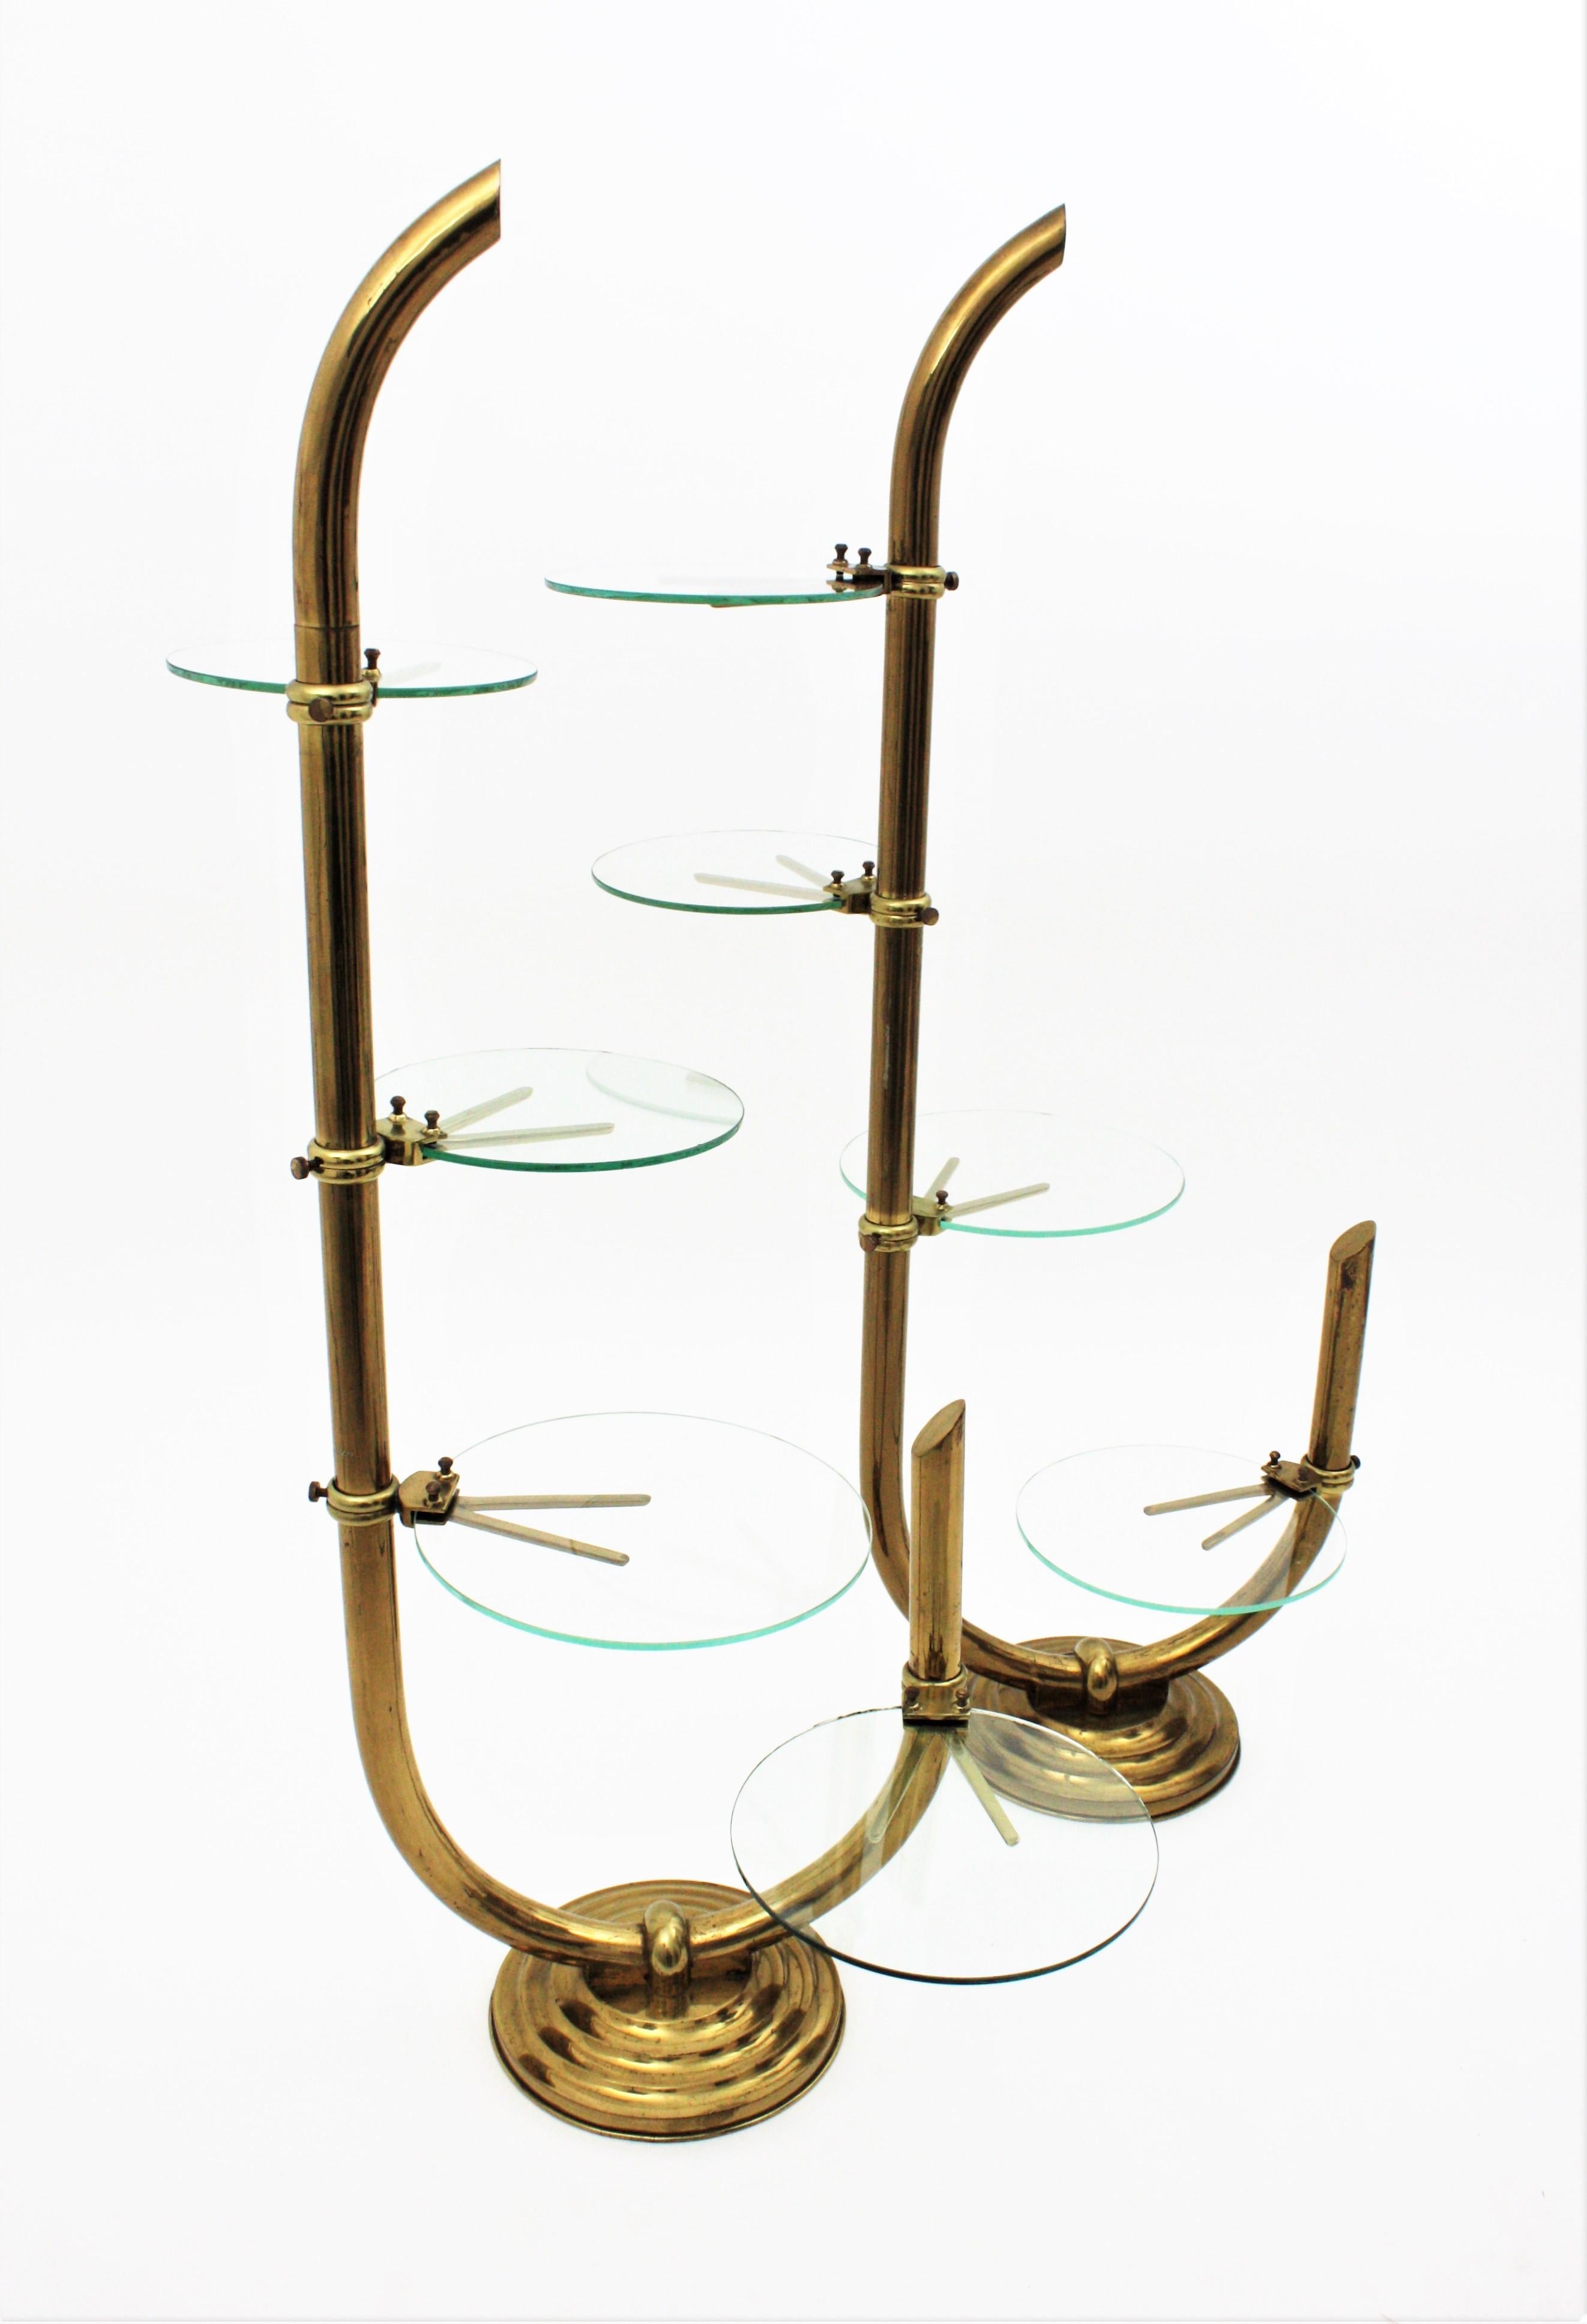 Pair of brass and glass floor shop display étagère with swivel glass shelves. Spain, 1930s.
This outstanding pair of brass display stands comes from an Art Deco period fashion shop in Barcelona. 
They feature a strong structure in brass holding 4